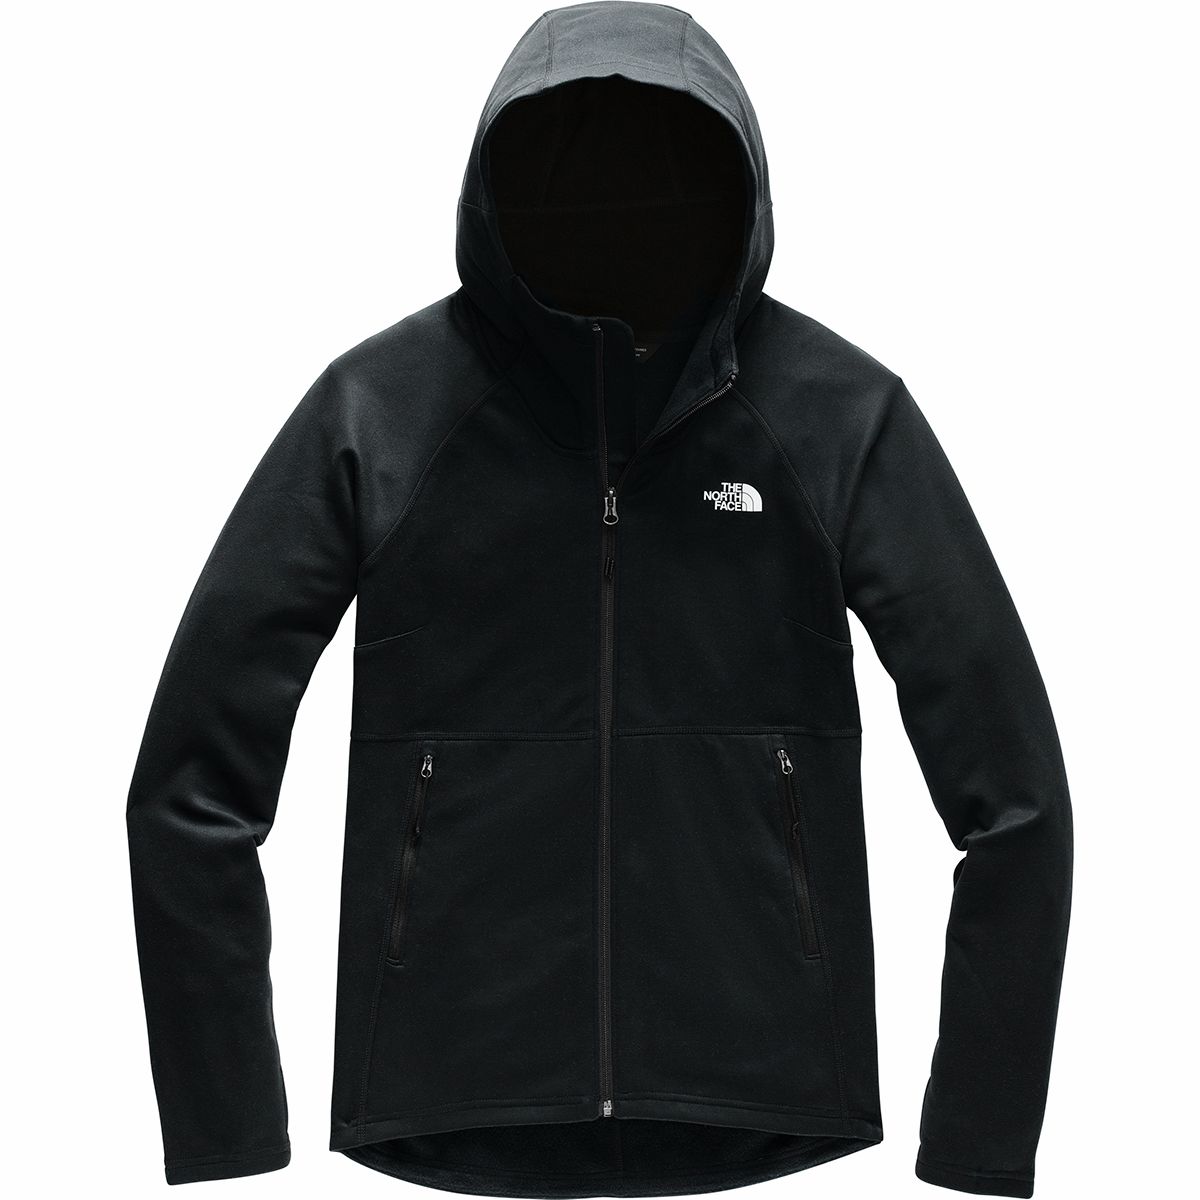 The North Face Canyonlands Hooded Fleece Jacket - Women's | Backcountry.com